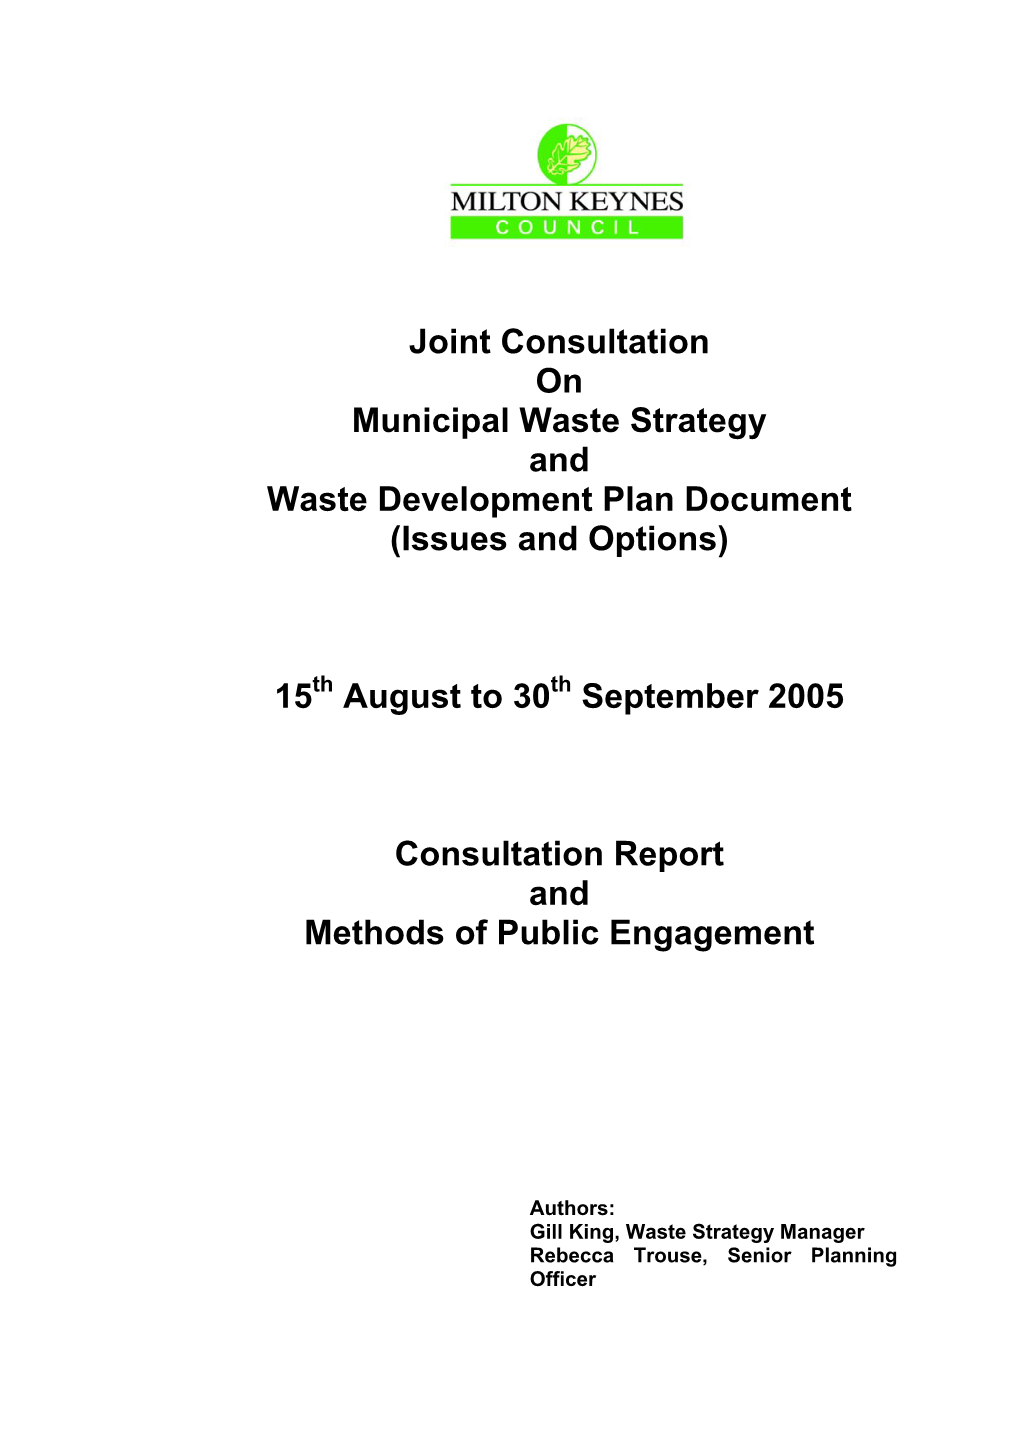 Joint Consultation on Municipal Waste Strategy and Waste Development Plan Document (Issues and Options)